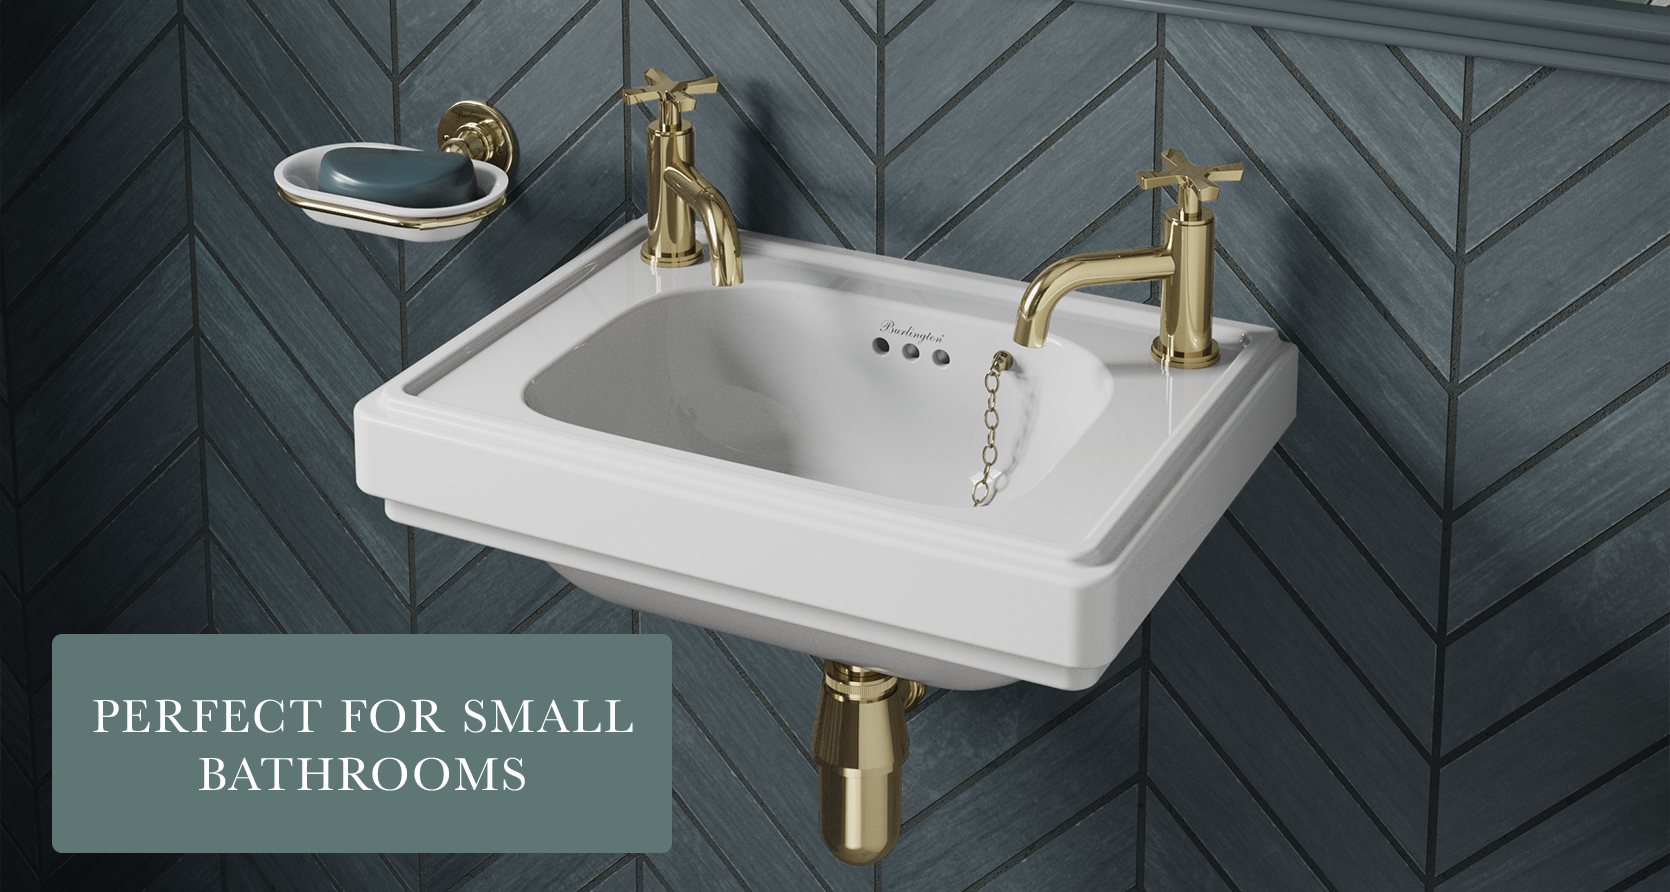 Art Deco bathroom | Create a modern classic bathroom you'll love with the Riviera Collection